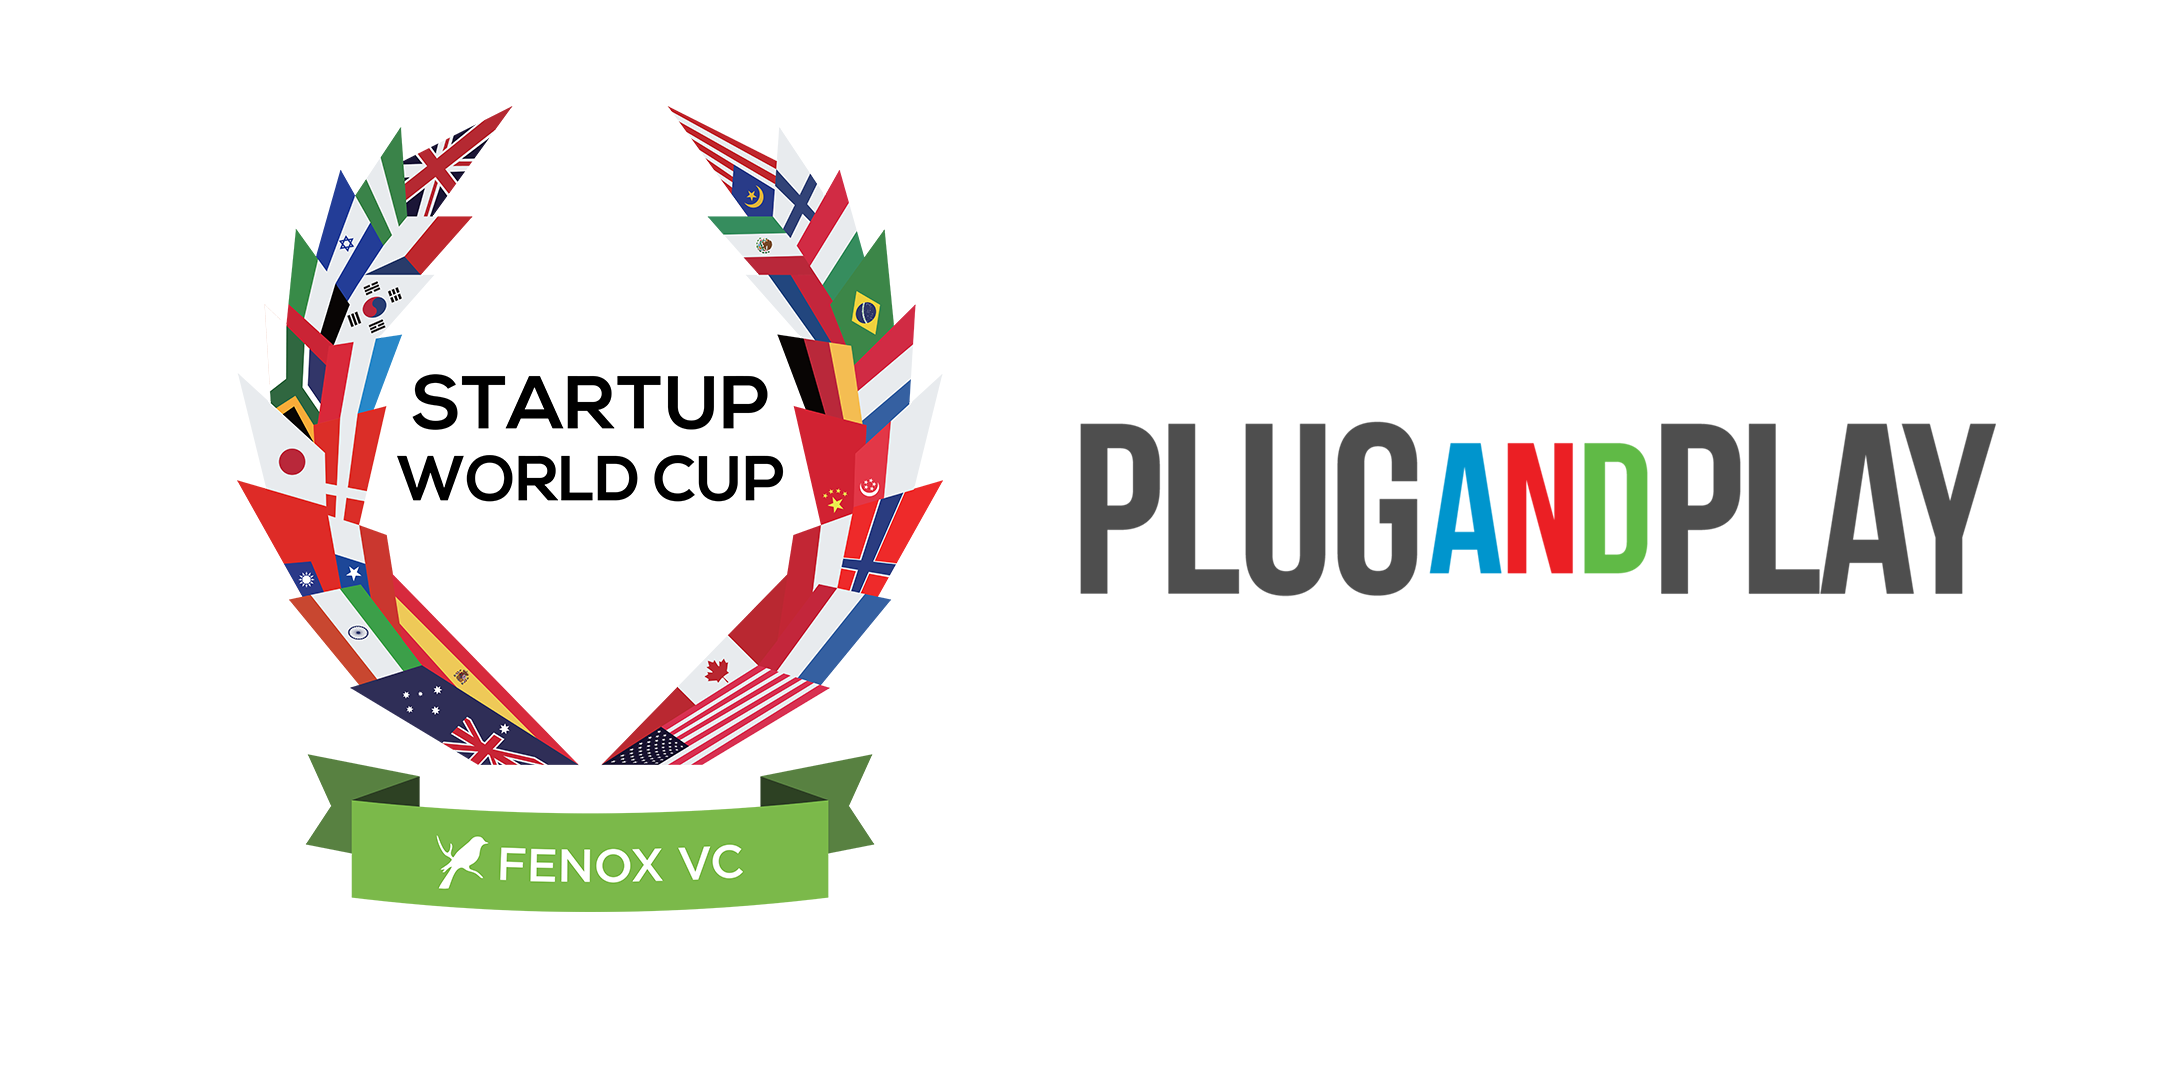 Startup World Cup and Plug and Play